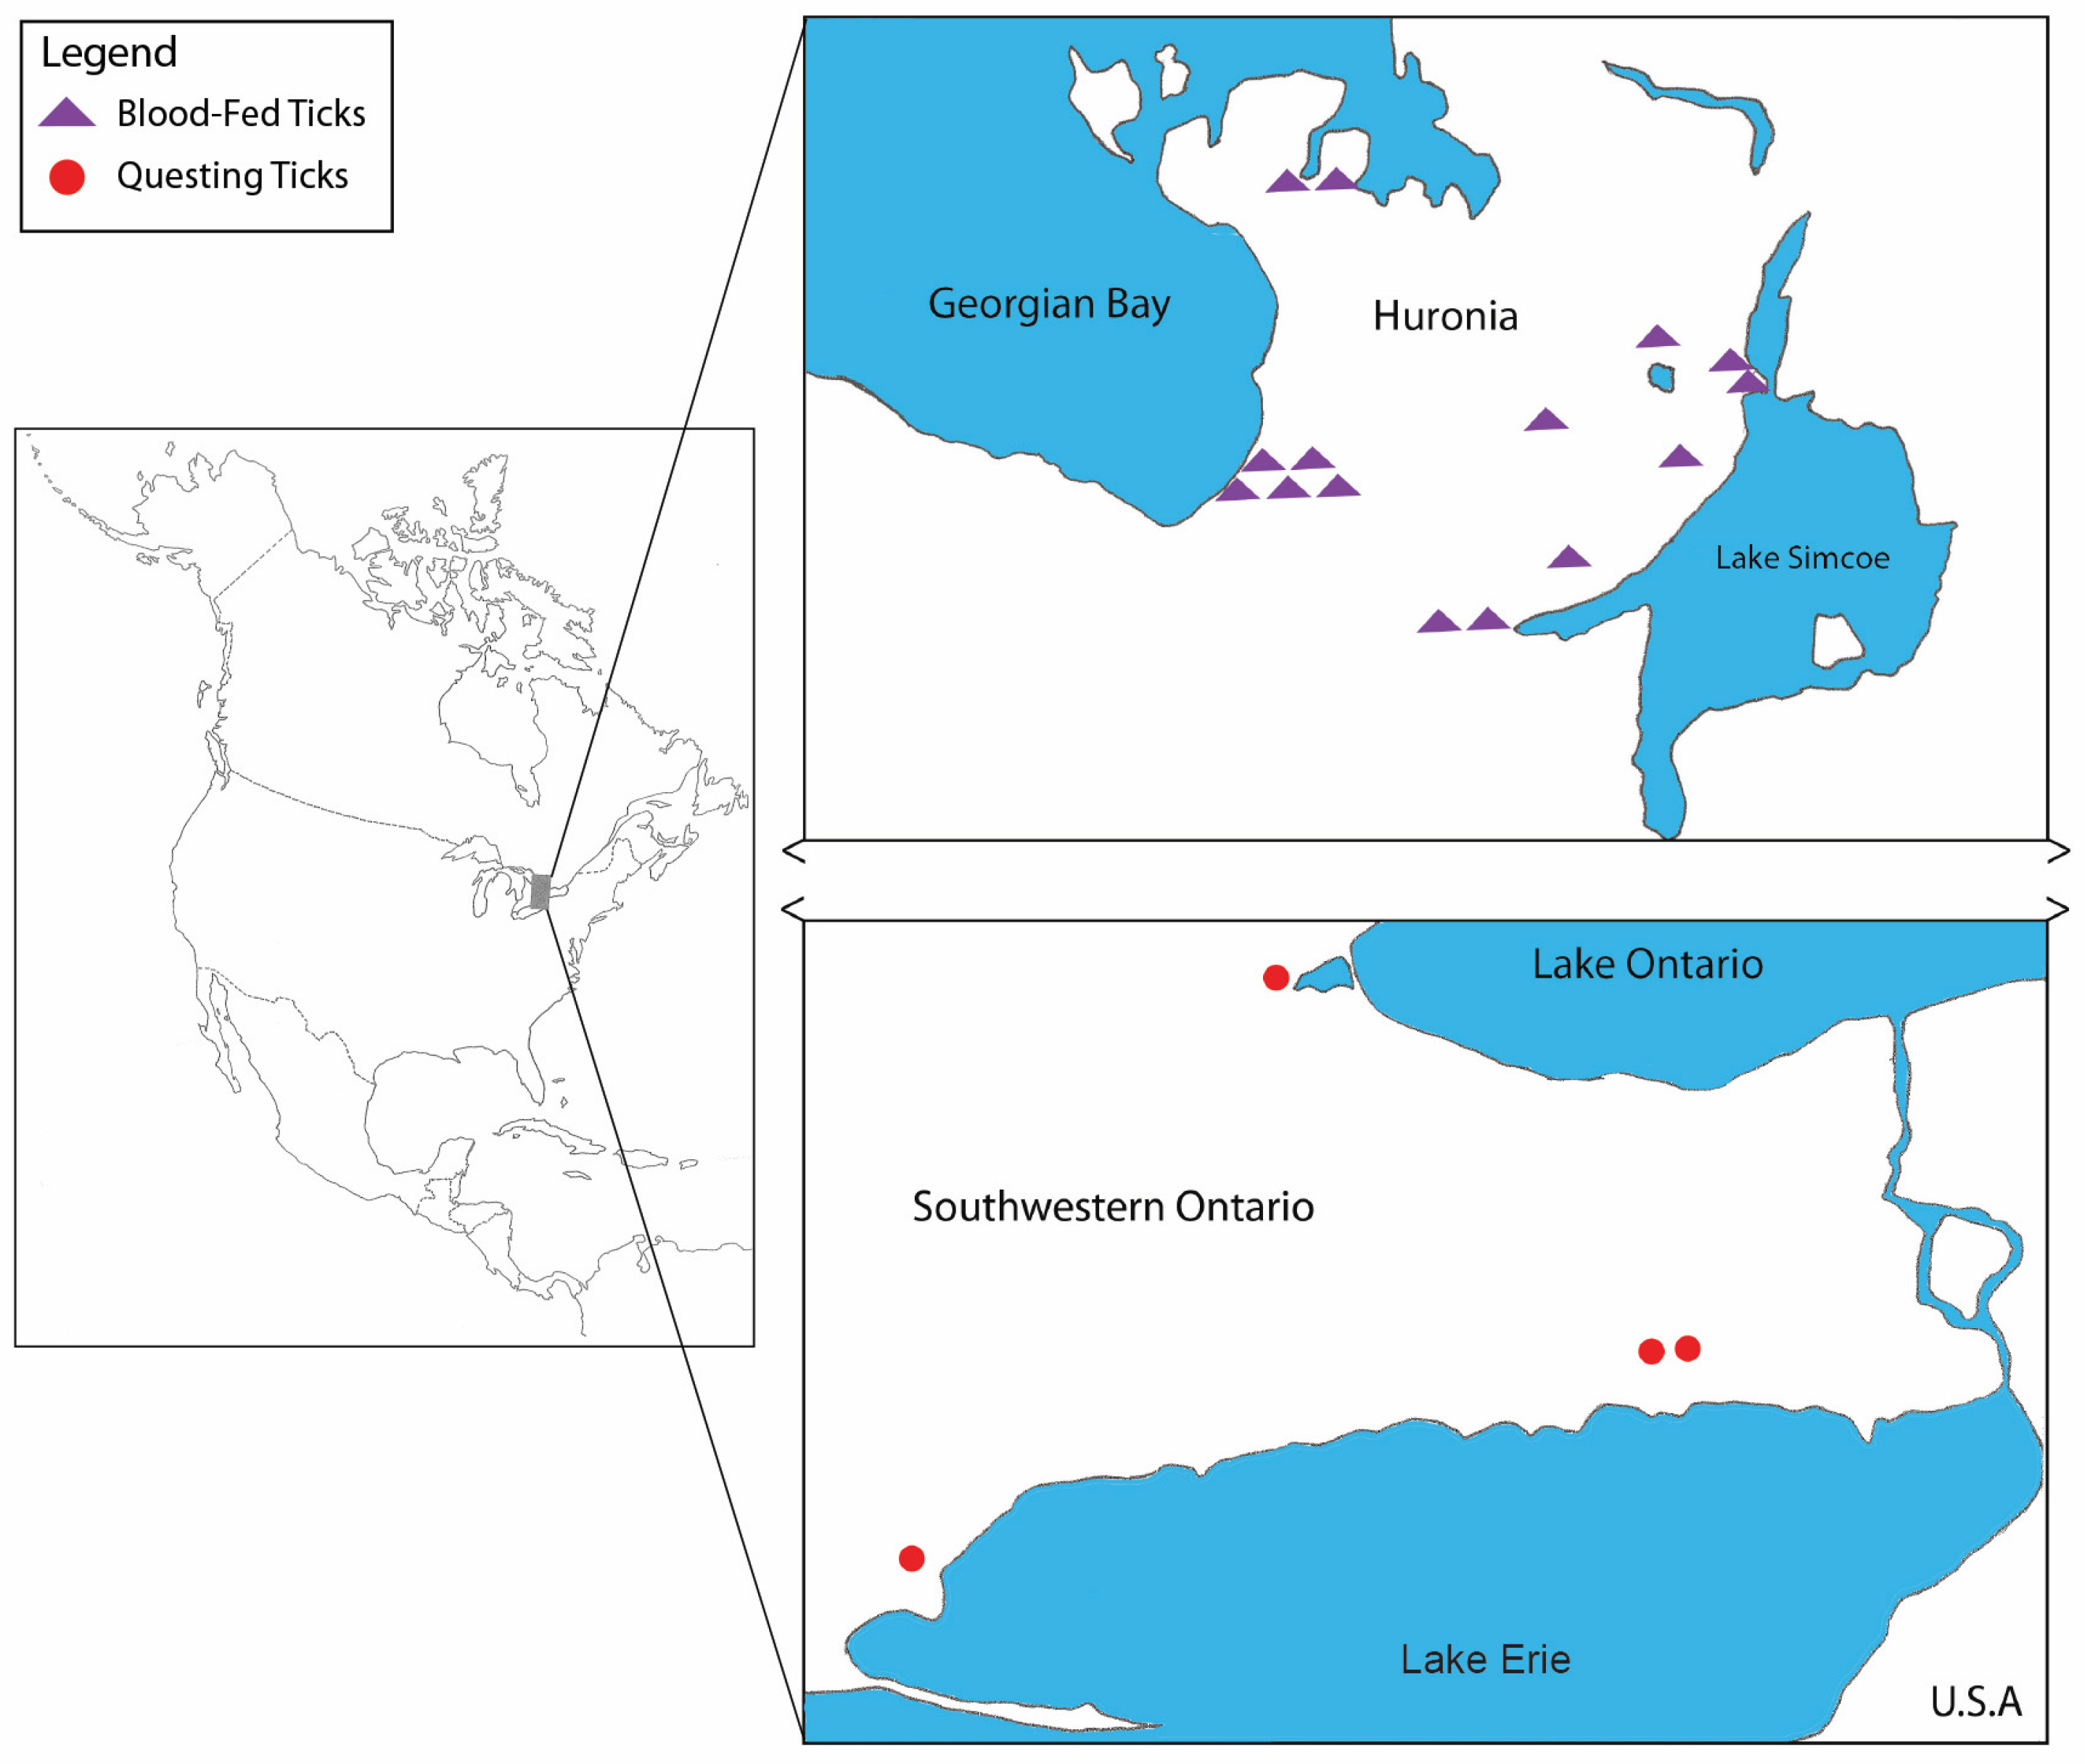 Pathogens | Free Full-Text | Detection of Babesia odocoilei in Ixodes  scapularis Ticks Collected in Southern Ontario, Canada